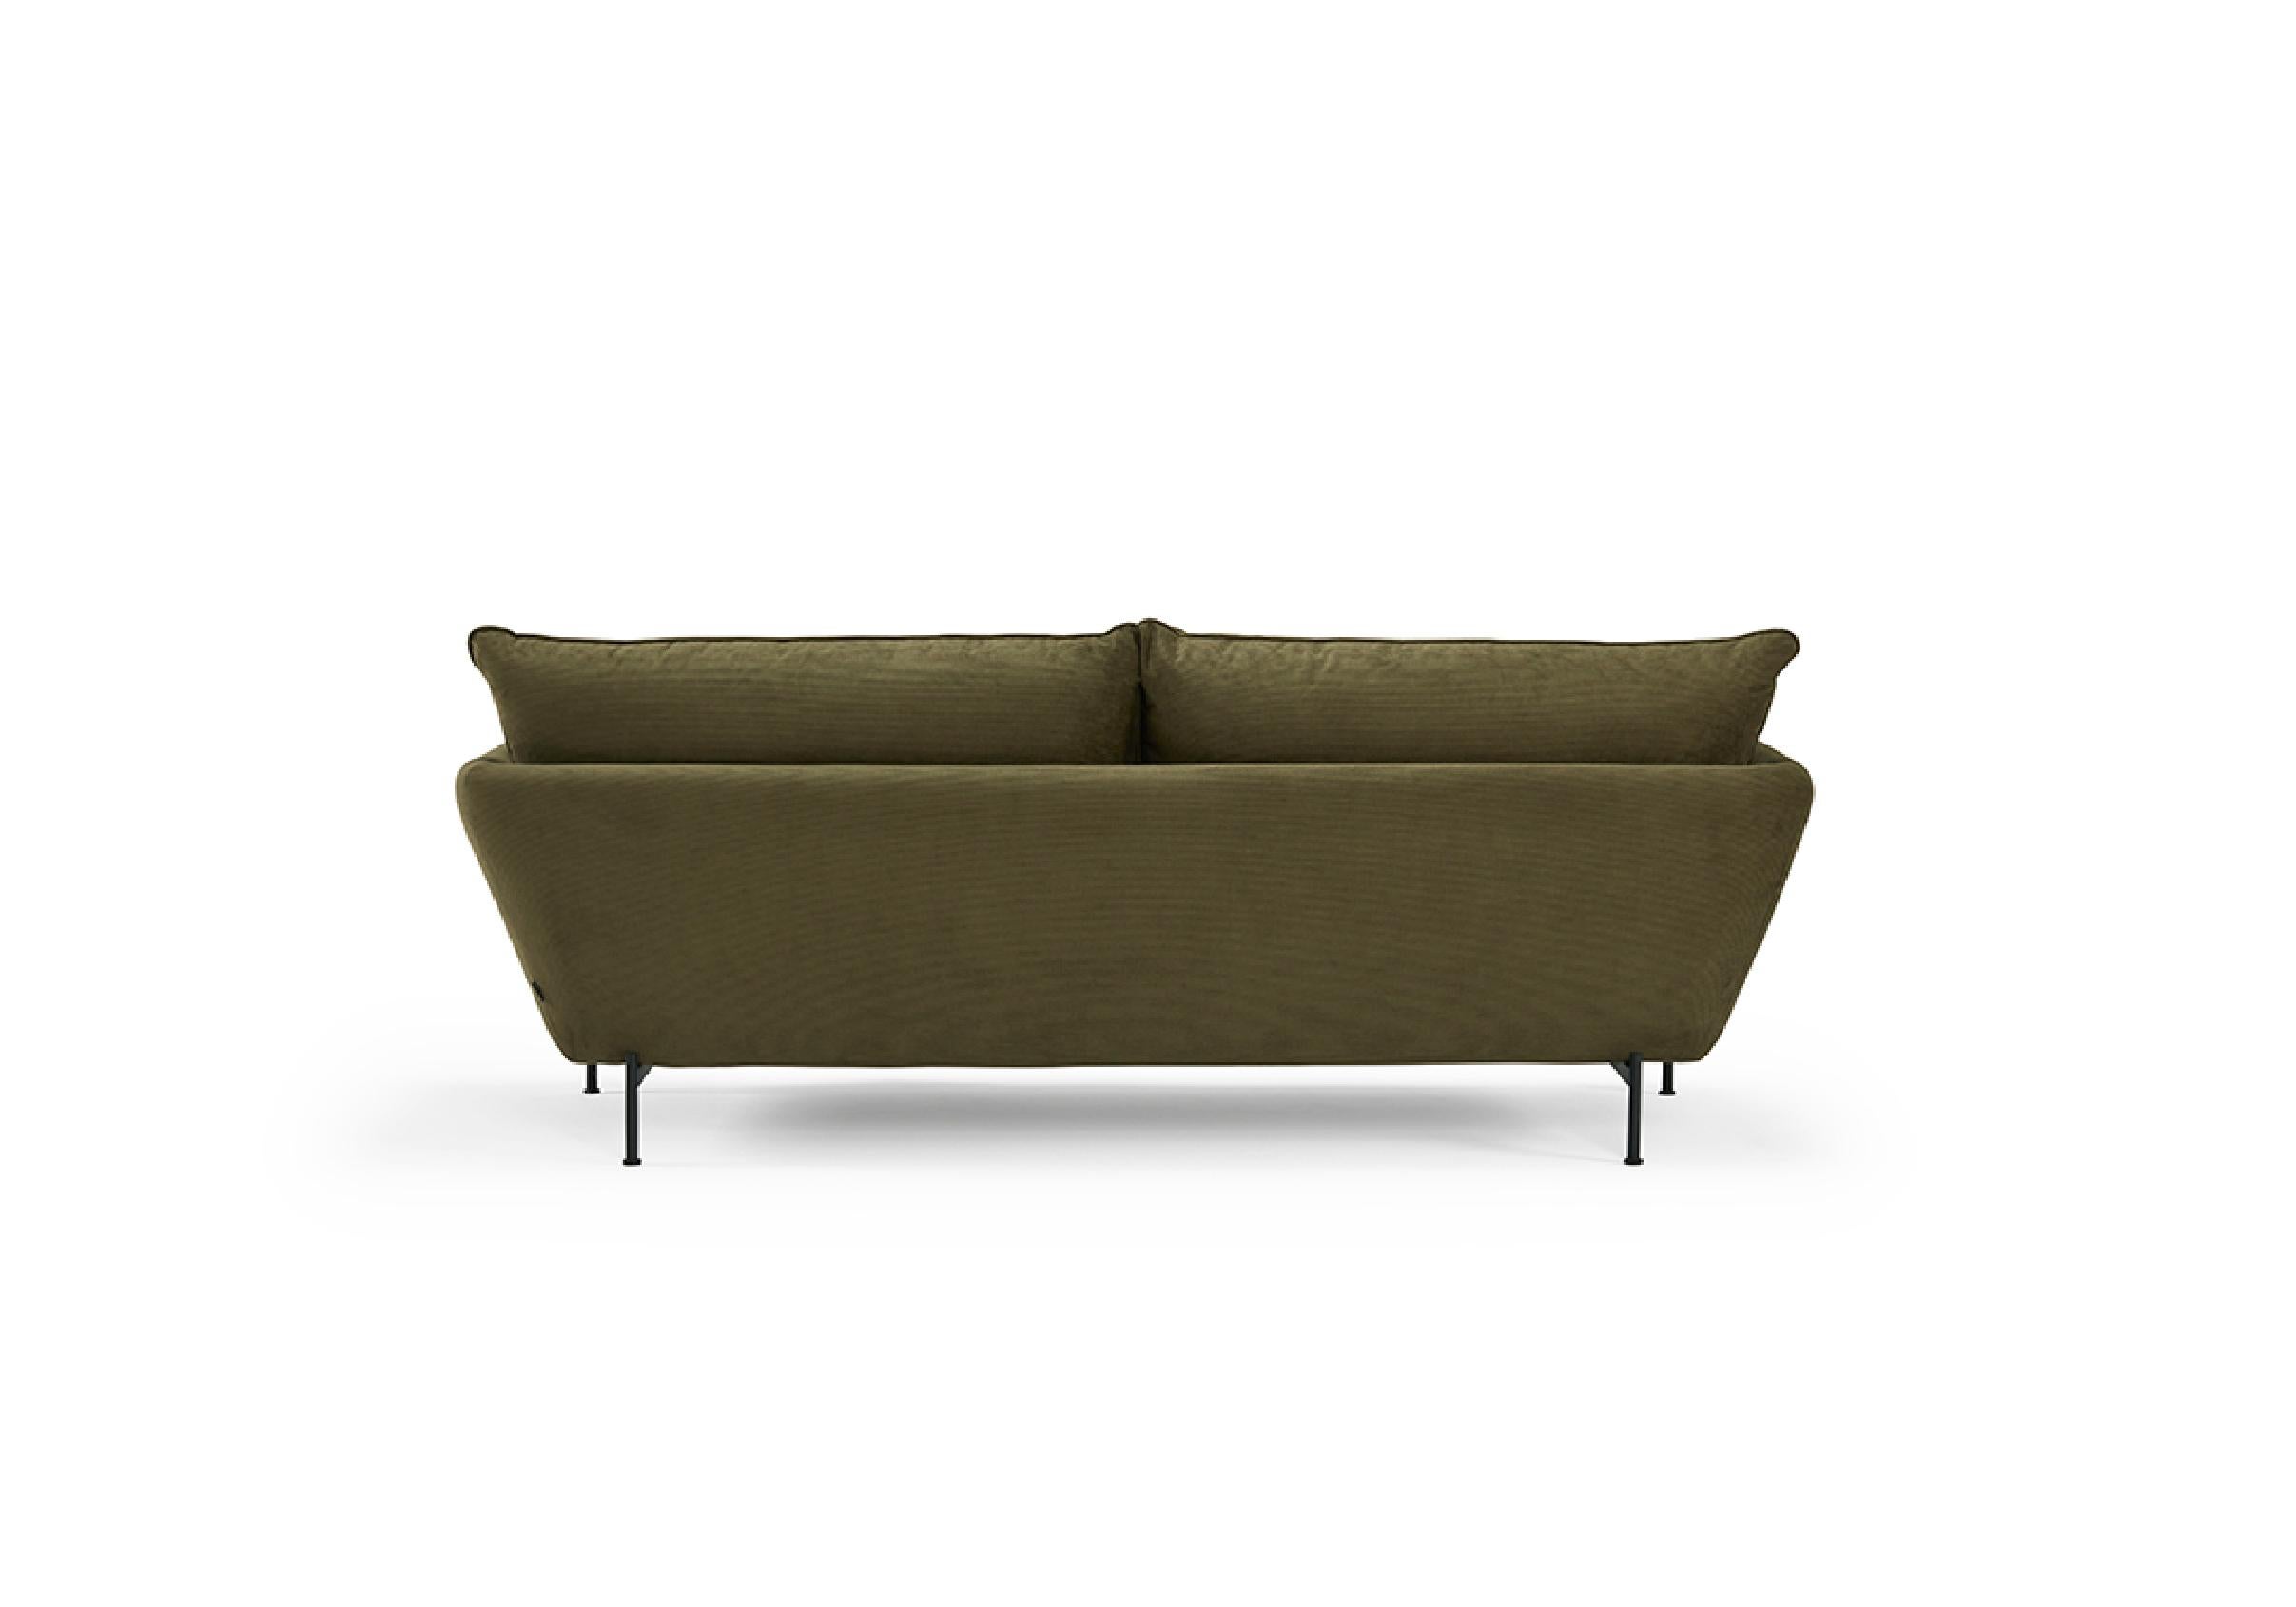 Metalwork Hayche Nave Lux 2 Seater Sofa - Green, UK, Made to Order For Sale